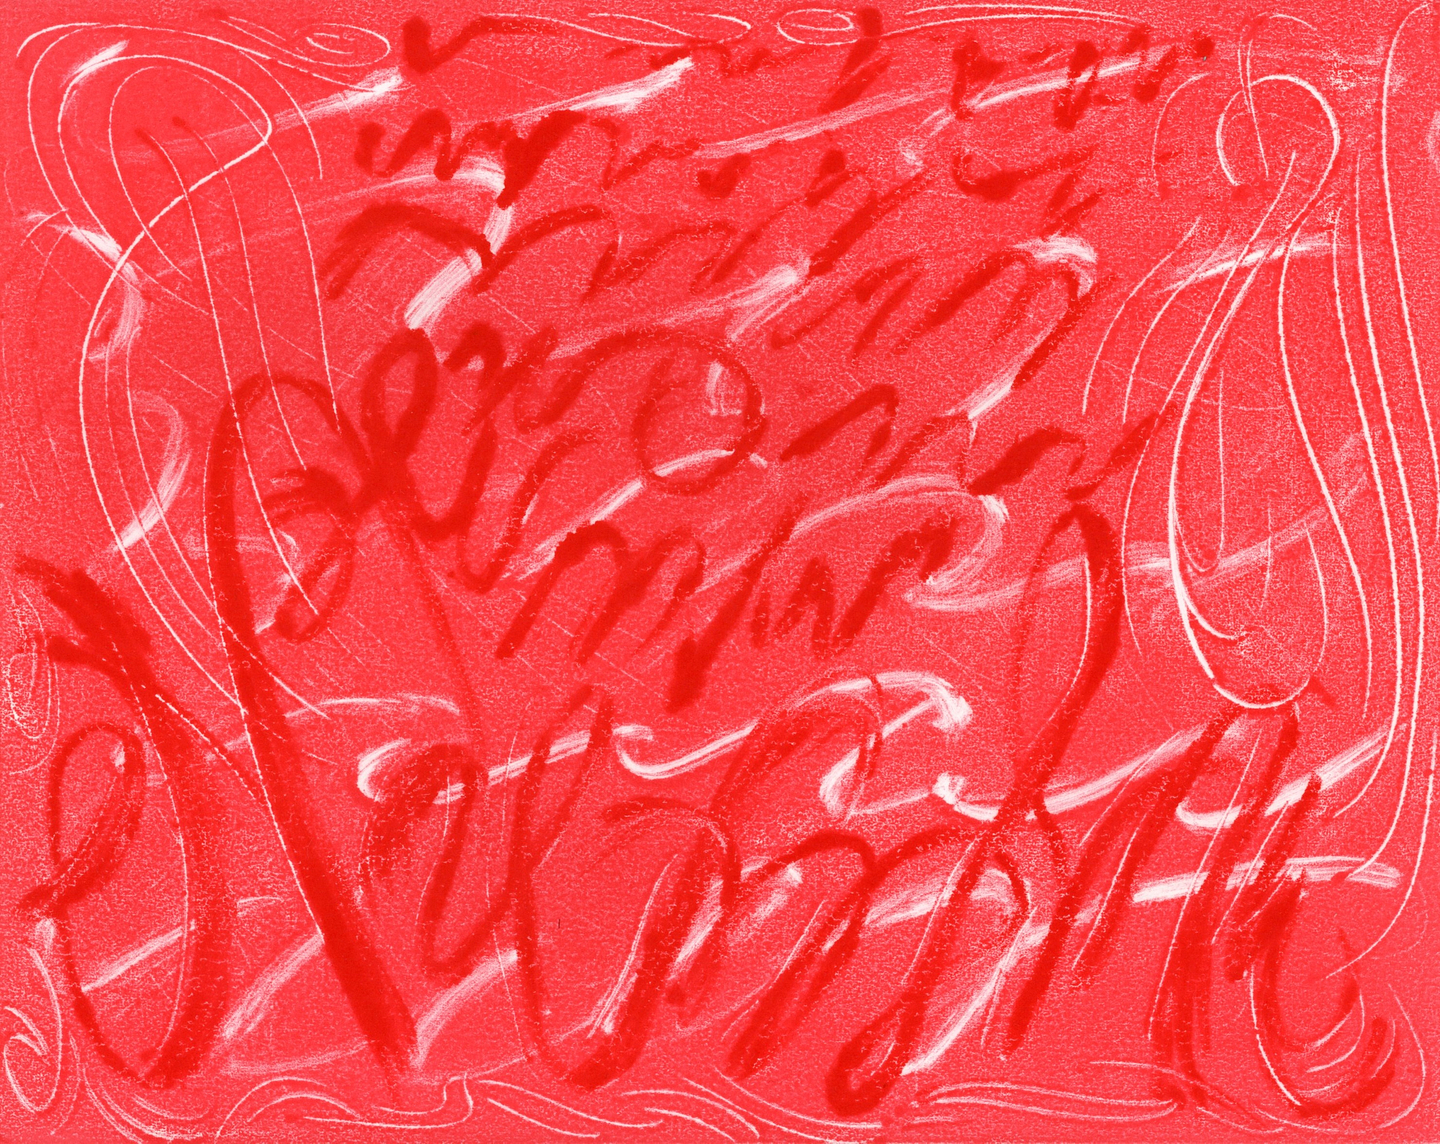 A red abstract monotype print with gestural white and red markings that resemble cursive handwriting.